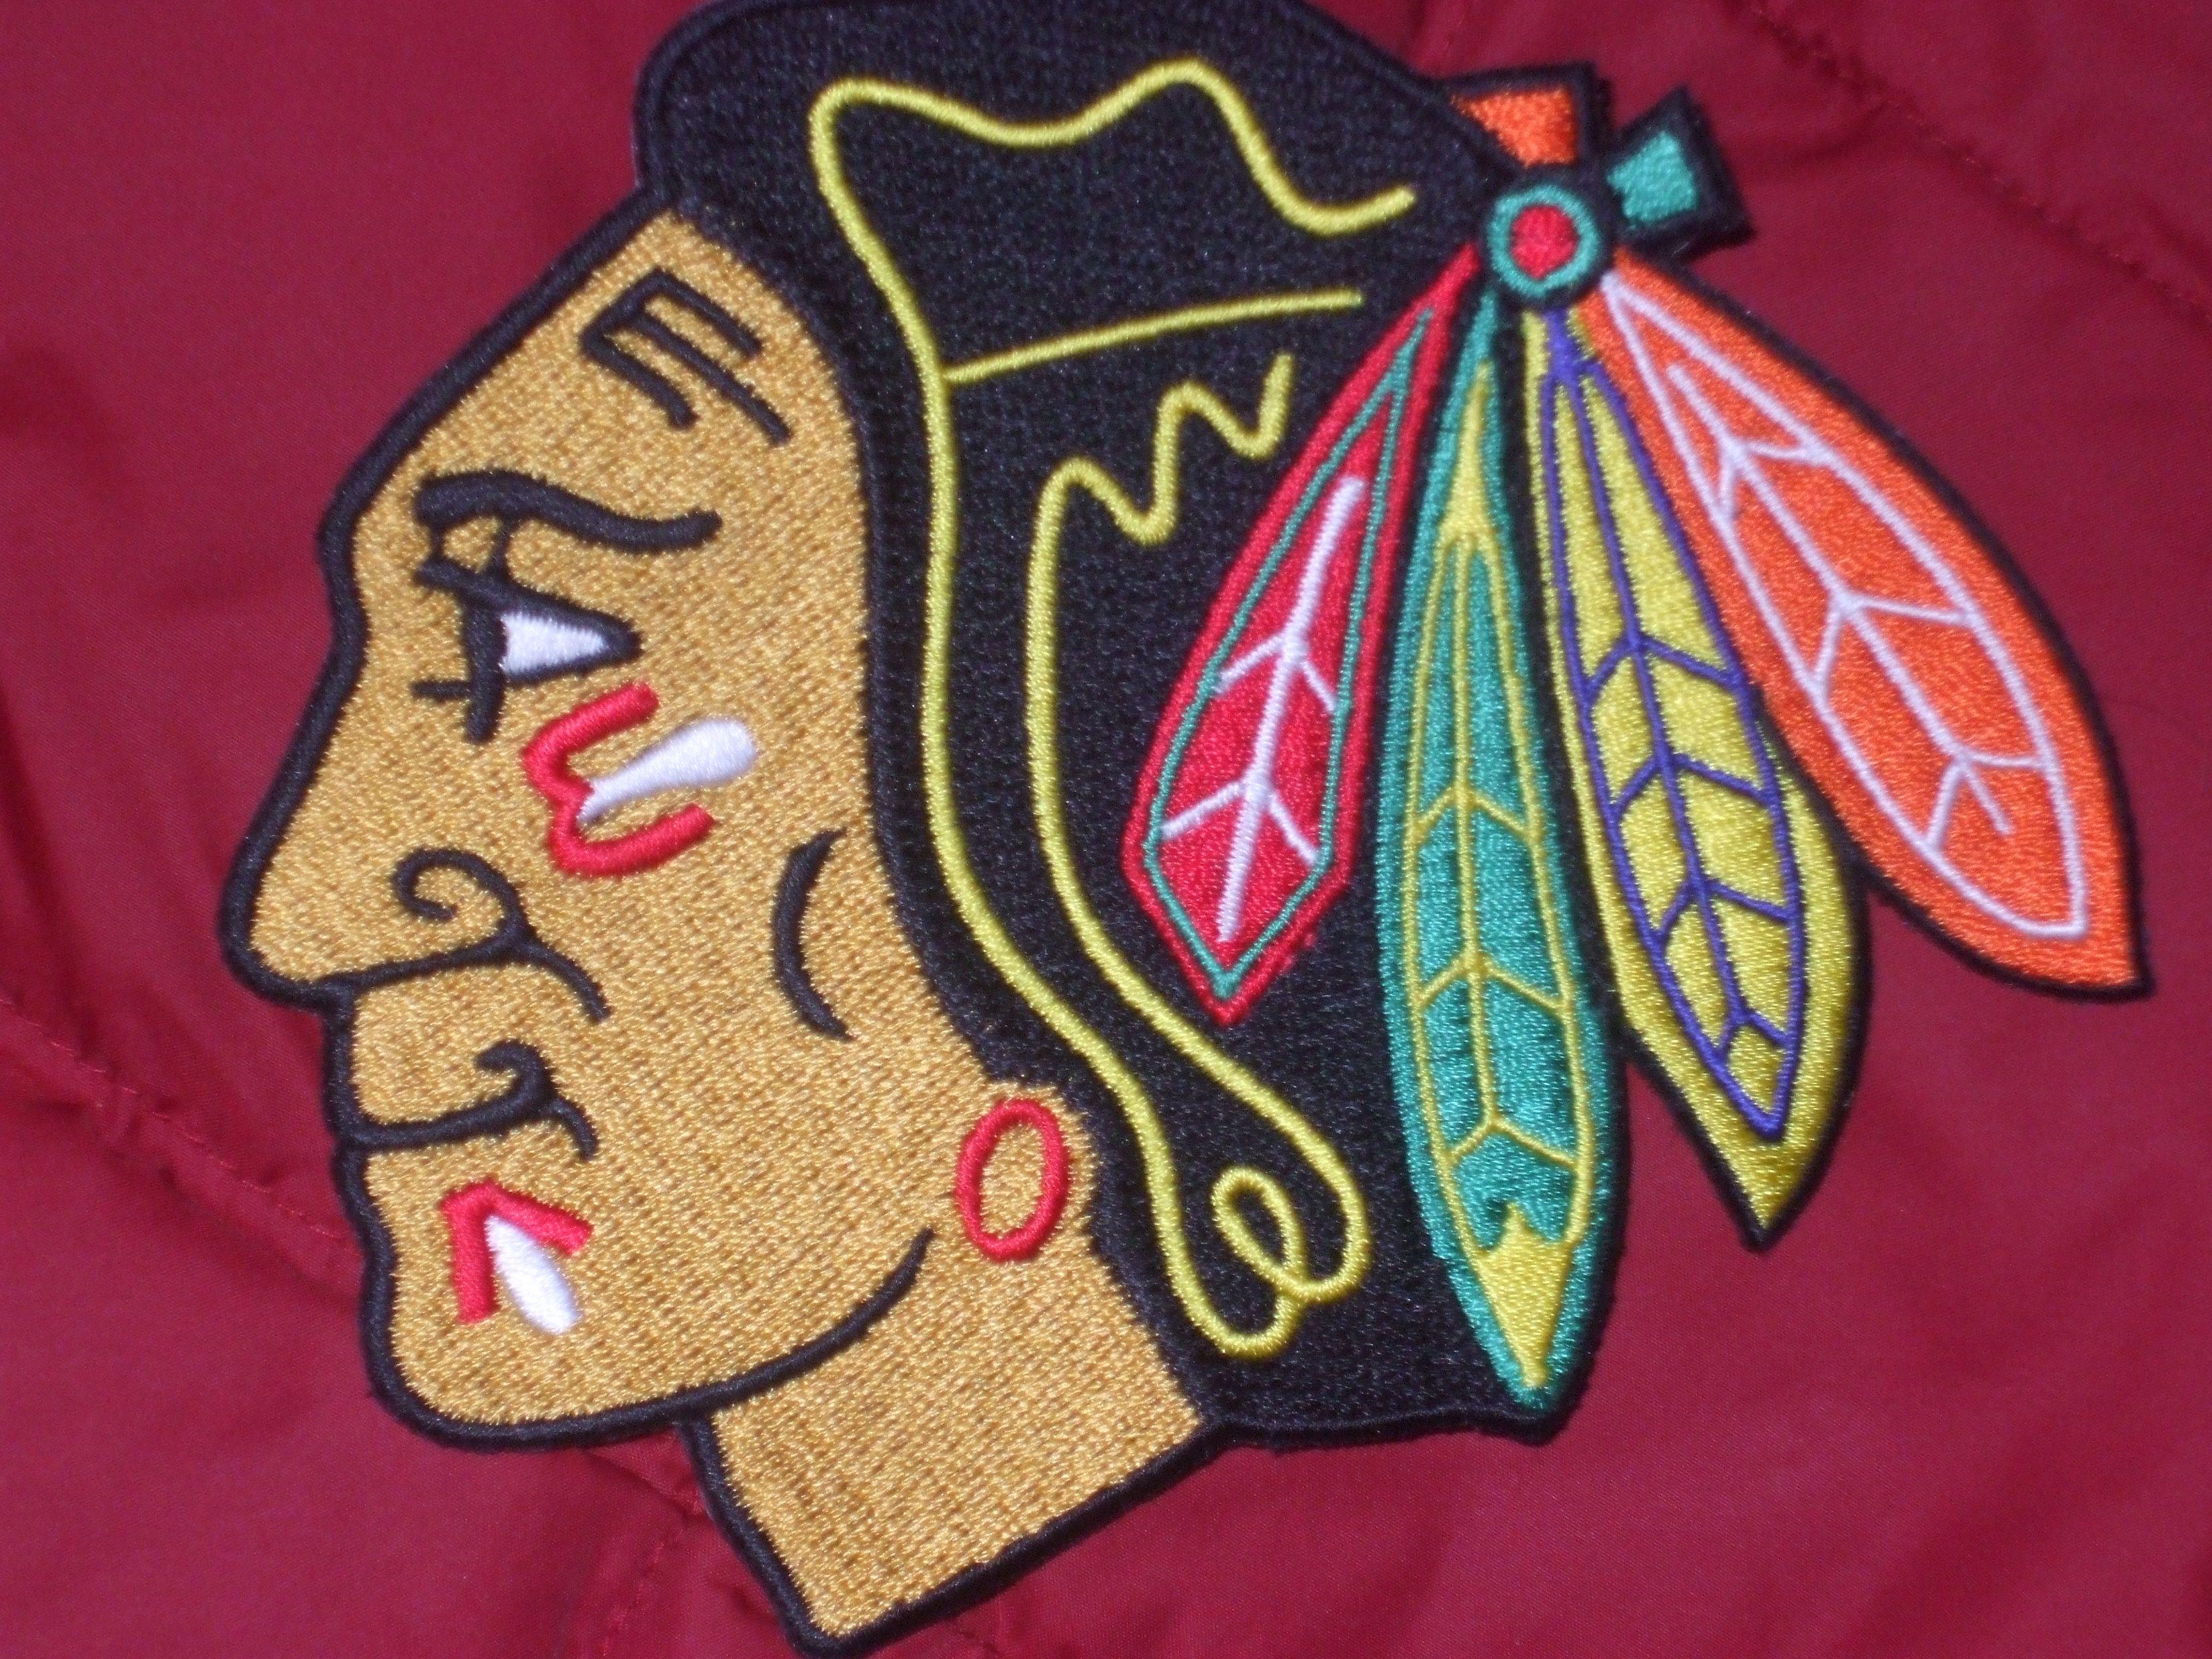 Indian Head Logo - Iconic Indian Head Logo Embroidered Patch of the Chicago Blackhawks